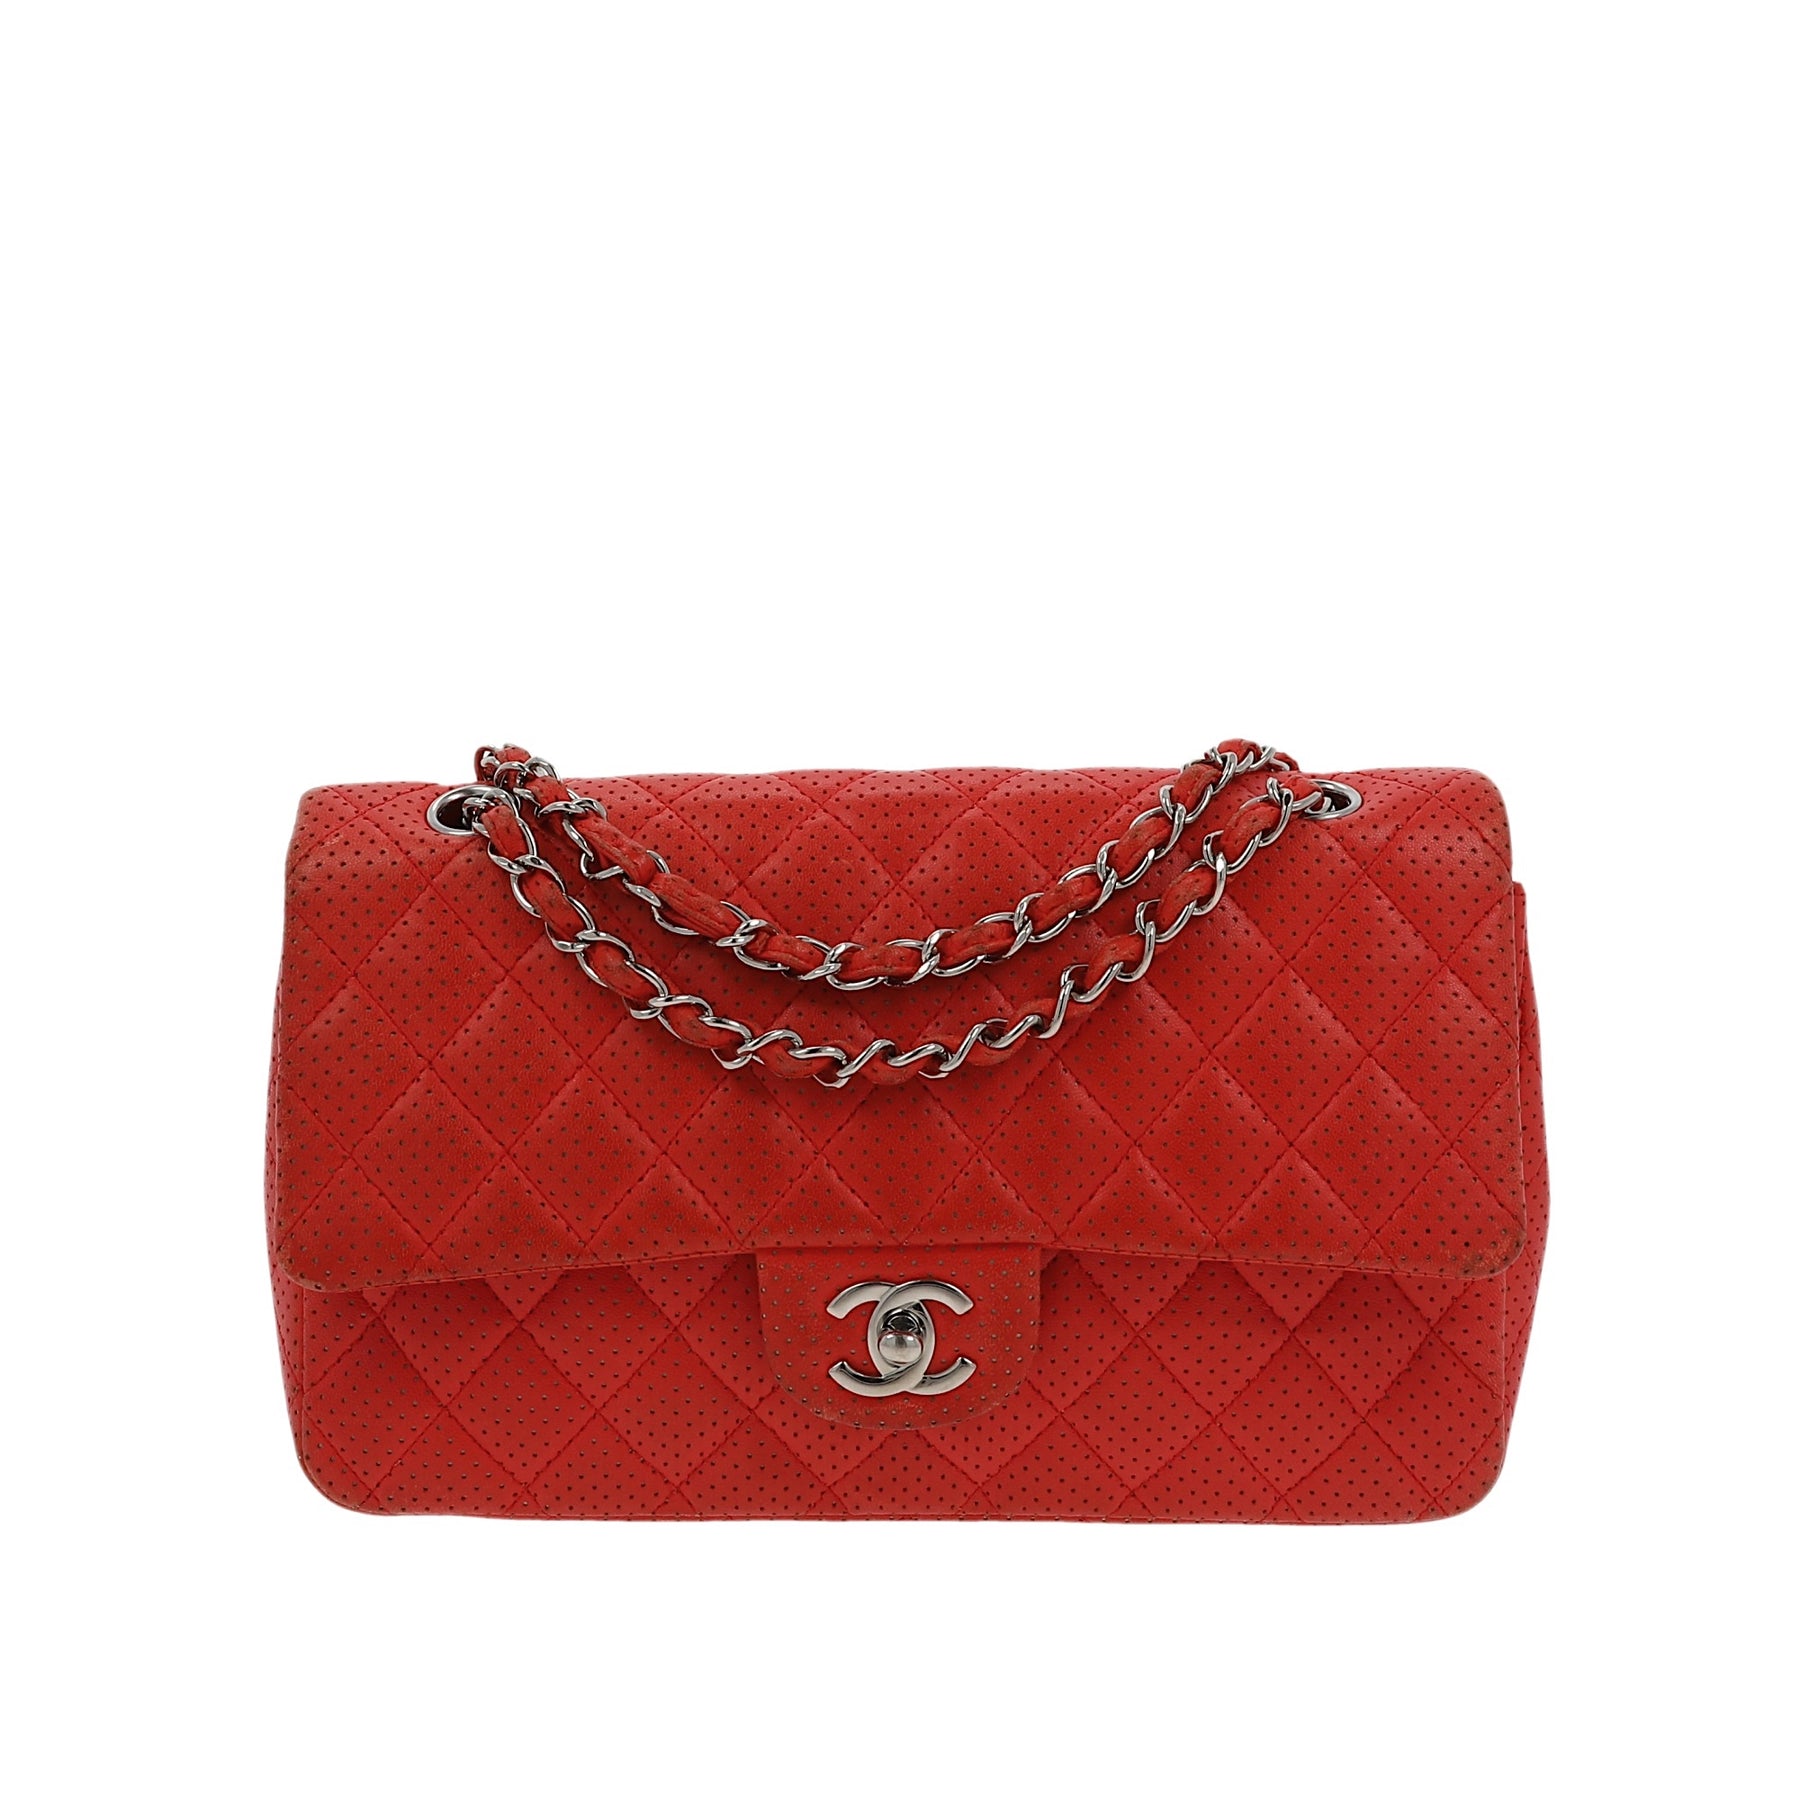 Timeless/classique leather crossbody bag Chanel Red in Leather